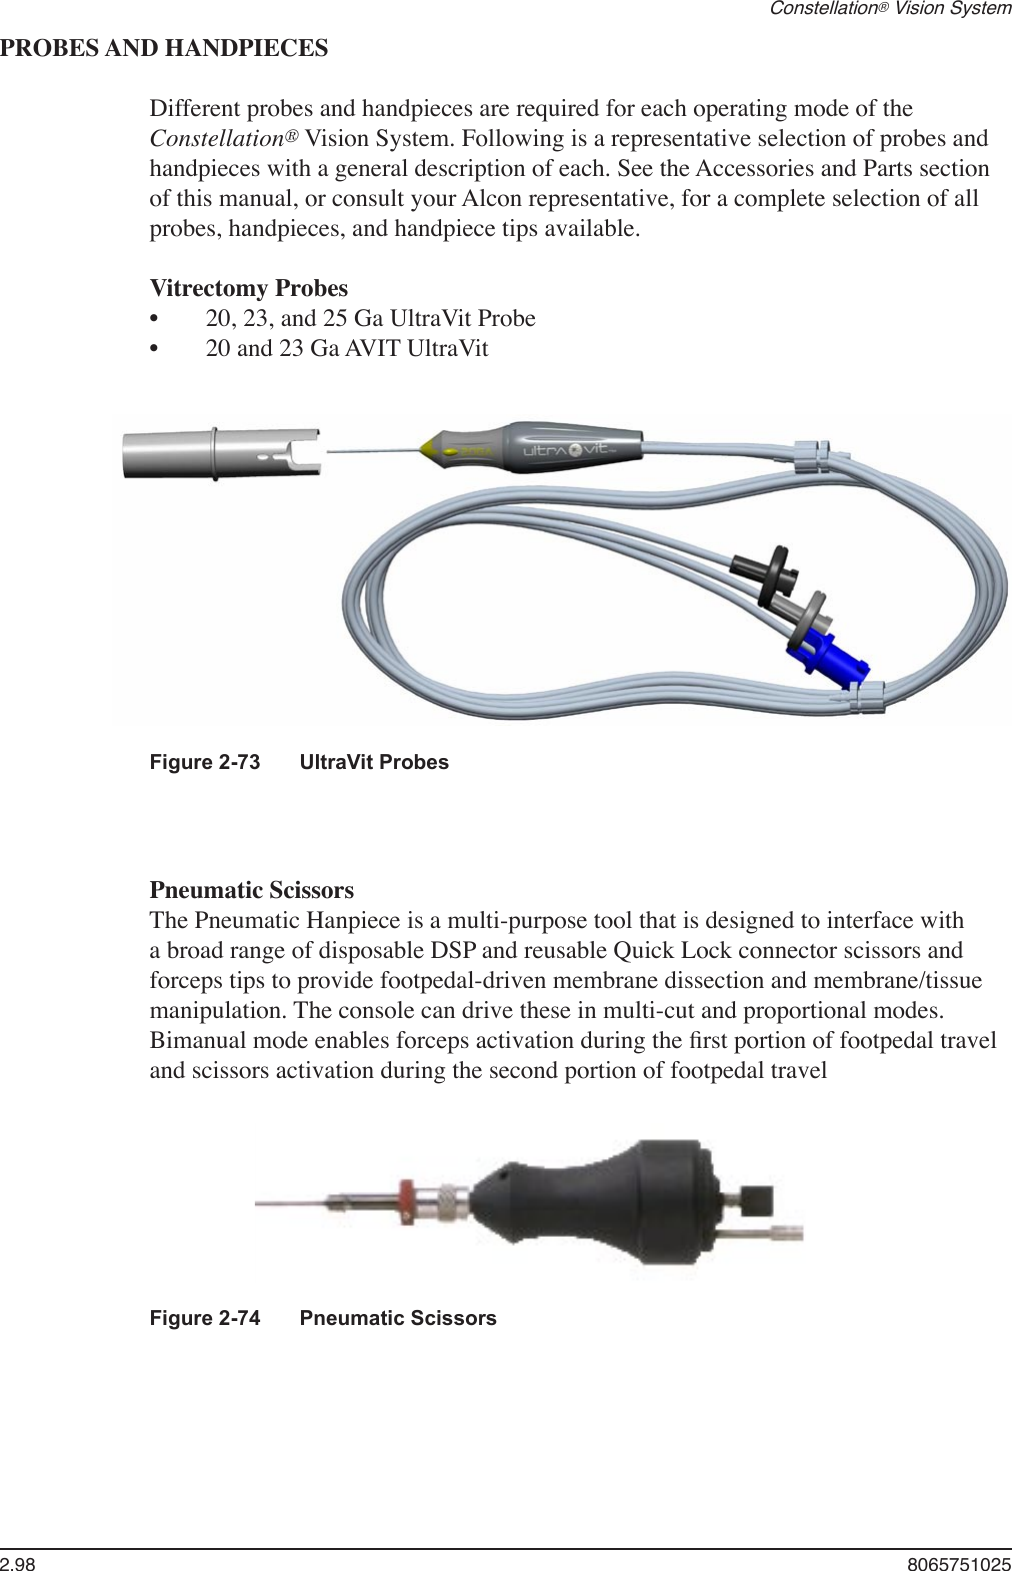 2.98  8065751025Constellation® Vision SystemPROBES AND HANDPIECESDifferent probes and handpieces are required for each operating mode of the Constellation® Vision System. Following is a representative selection of probes and handpieces with a general description of each. See the Accessories and Parts section of this manual, or consult your Alcon representative, for a complete selection of all probes, handpieces, and handpiece tips available.  Vitrectomy Probes   20, 23, and 25 Ga UltraVit Probe  20 and 23 Ga AVIT UltraVit••    Pneumatic Scissors   The Pneumatic Hanpiece is a multi-purpose tool that is designed to interface with a broad range of disposable DSP and reusable Quick Lock connector scissors and forceps tips to provide footpedal-driven membrane dissection and membrane/tissue manipulation. The console can drive these in multi-cut and proportional modes. Bimanual mode enables forceps activation during the ﬁrst portion of footpedal travel and scissors activation during the second portion of footpedal travel Figure 2-73  UltraVit ProbesFigure 2-74  Pneumatic Scissors 